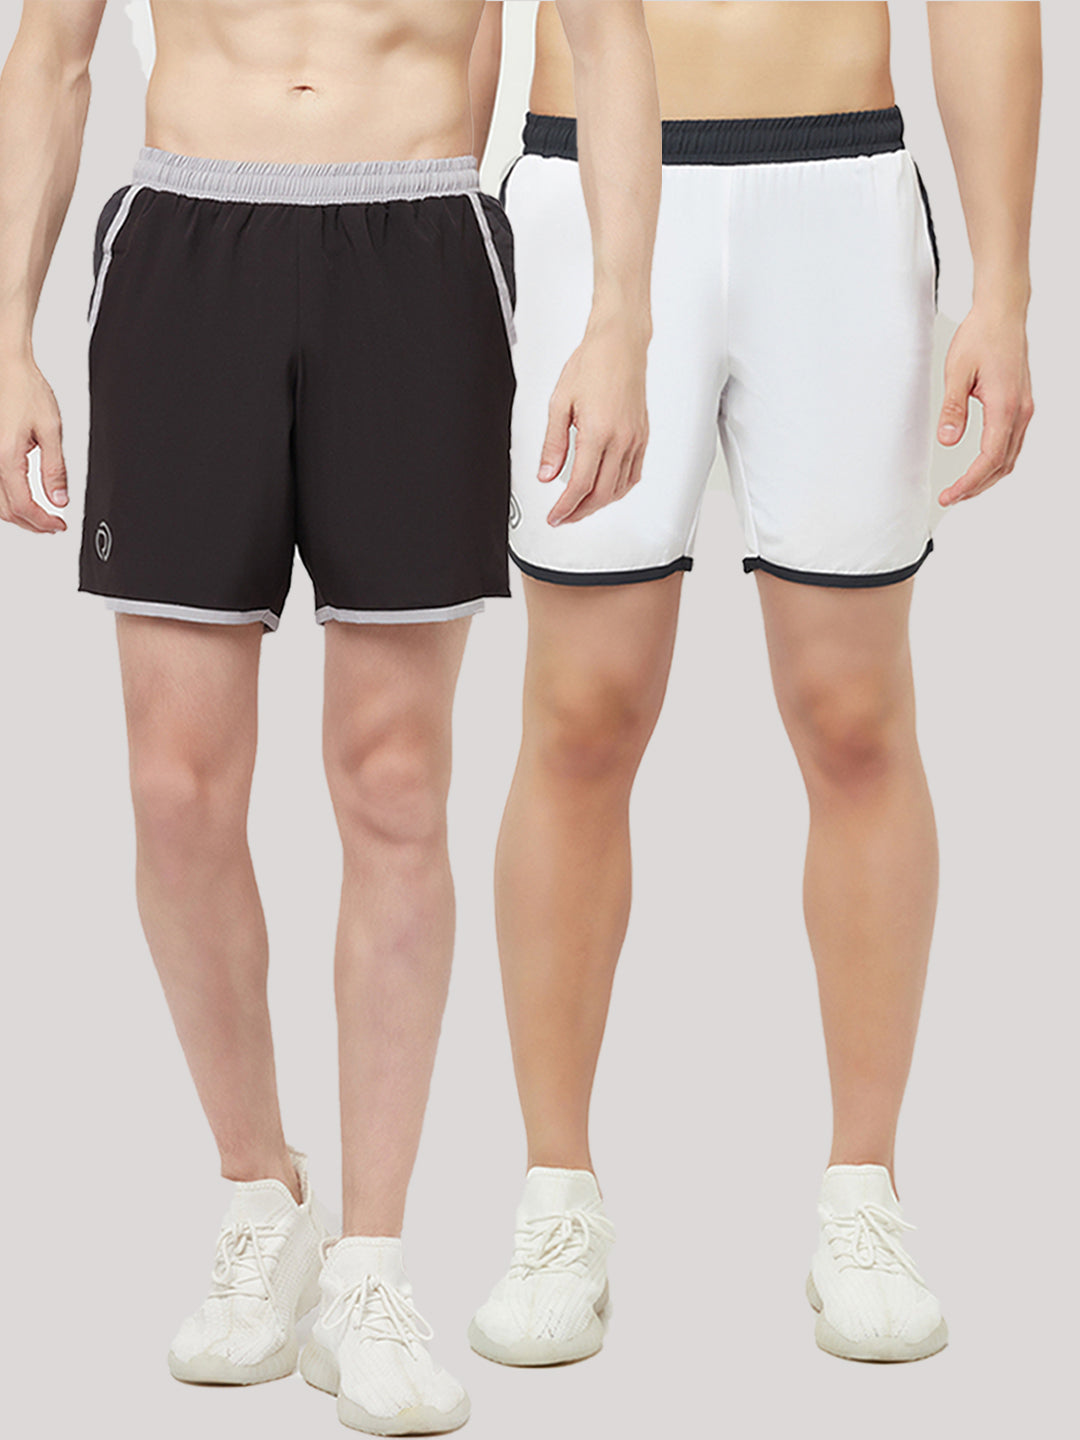 7" Shorts with Zipper Pocket - Pack of 2 Black & White